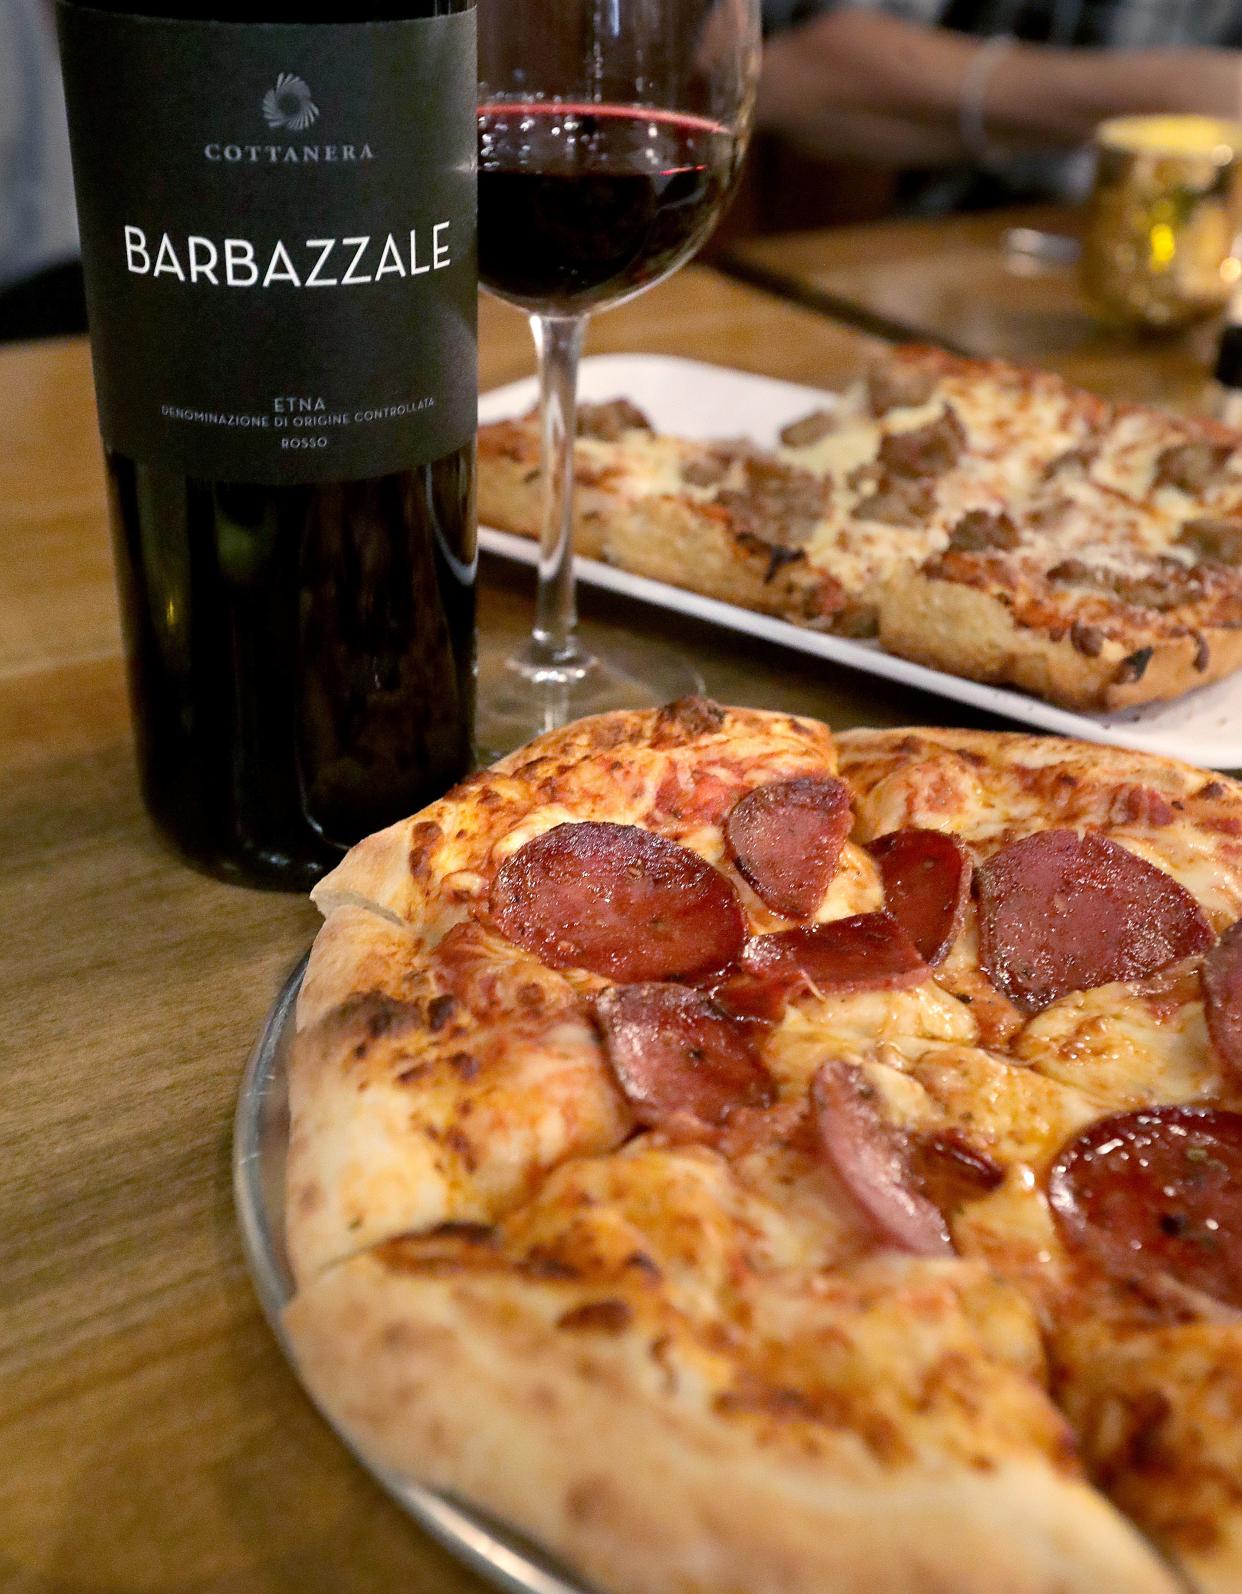 A bottle of Barbazzalle Etna Rosso and a Calabrese pizza from Cafe Arnone's Pizzeria & Wine Room in Fairlawn.